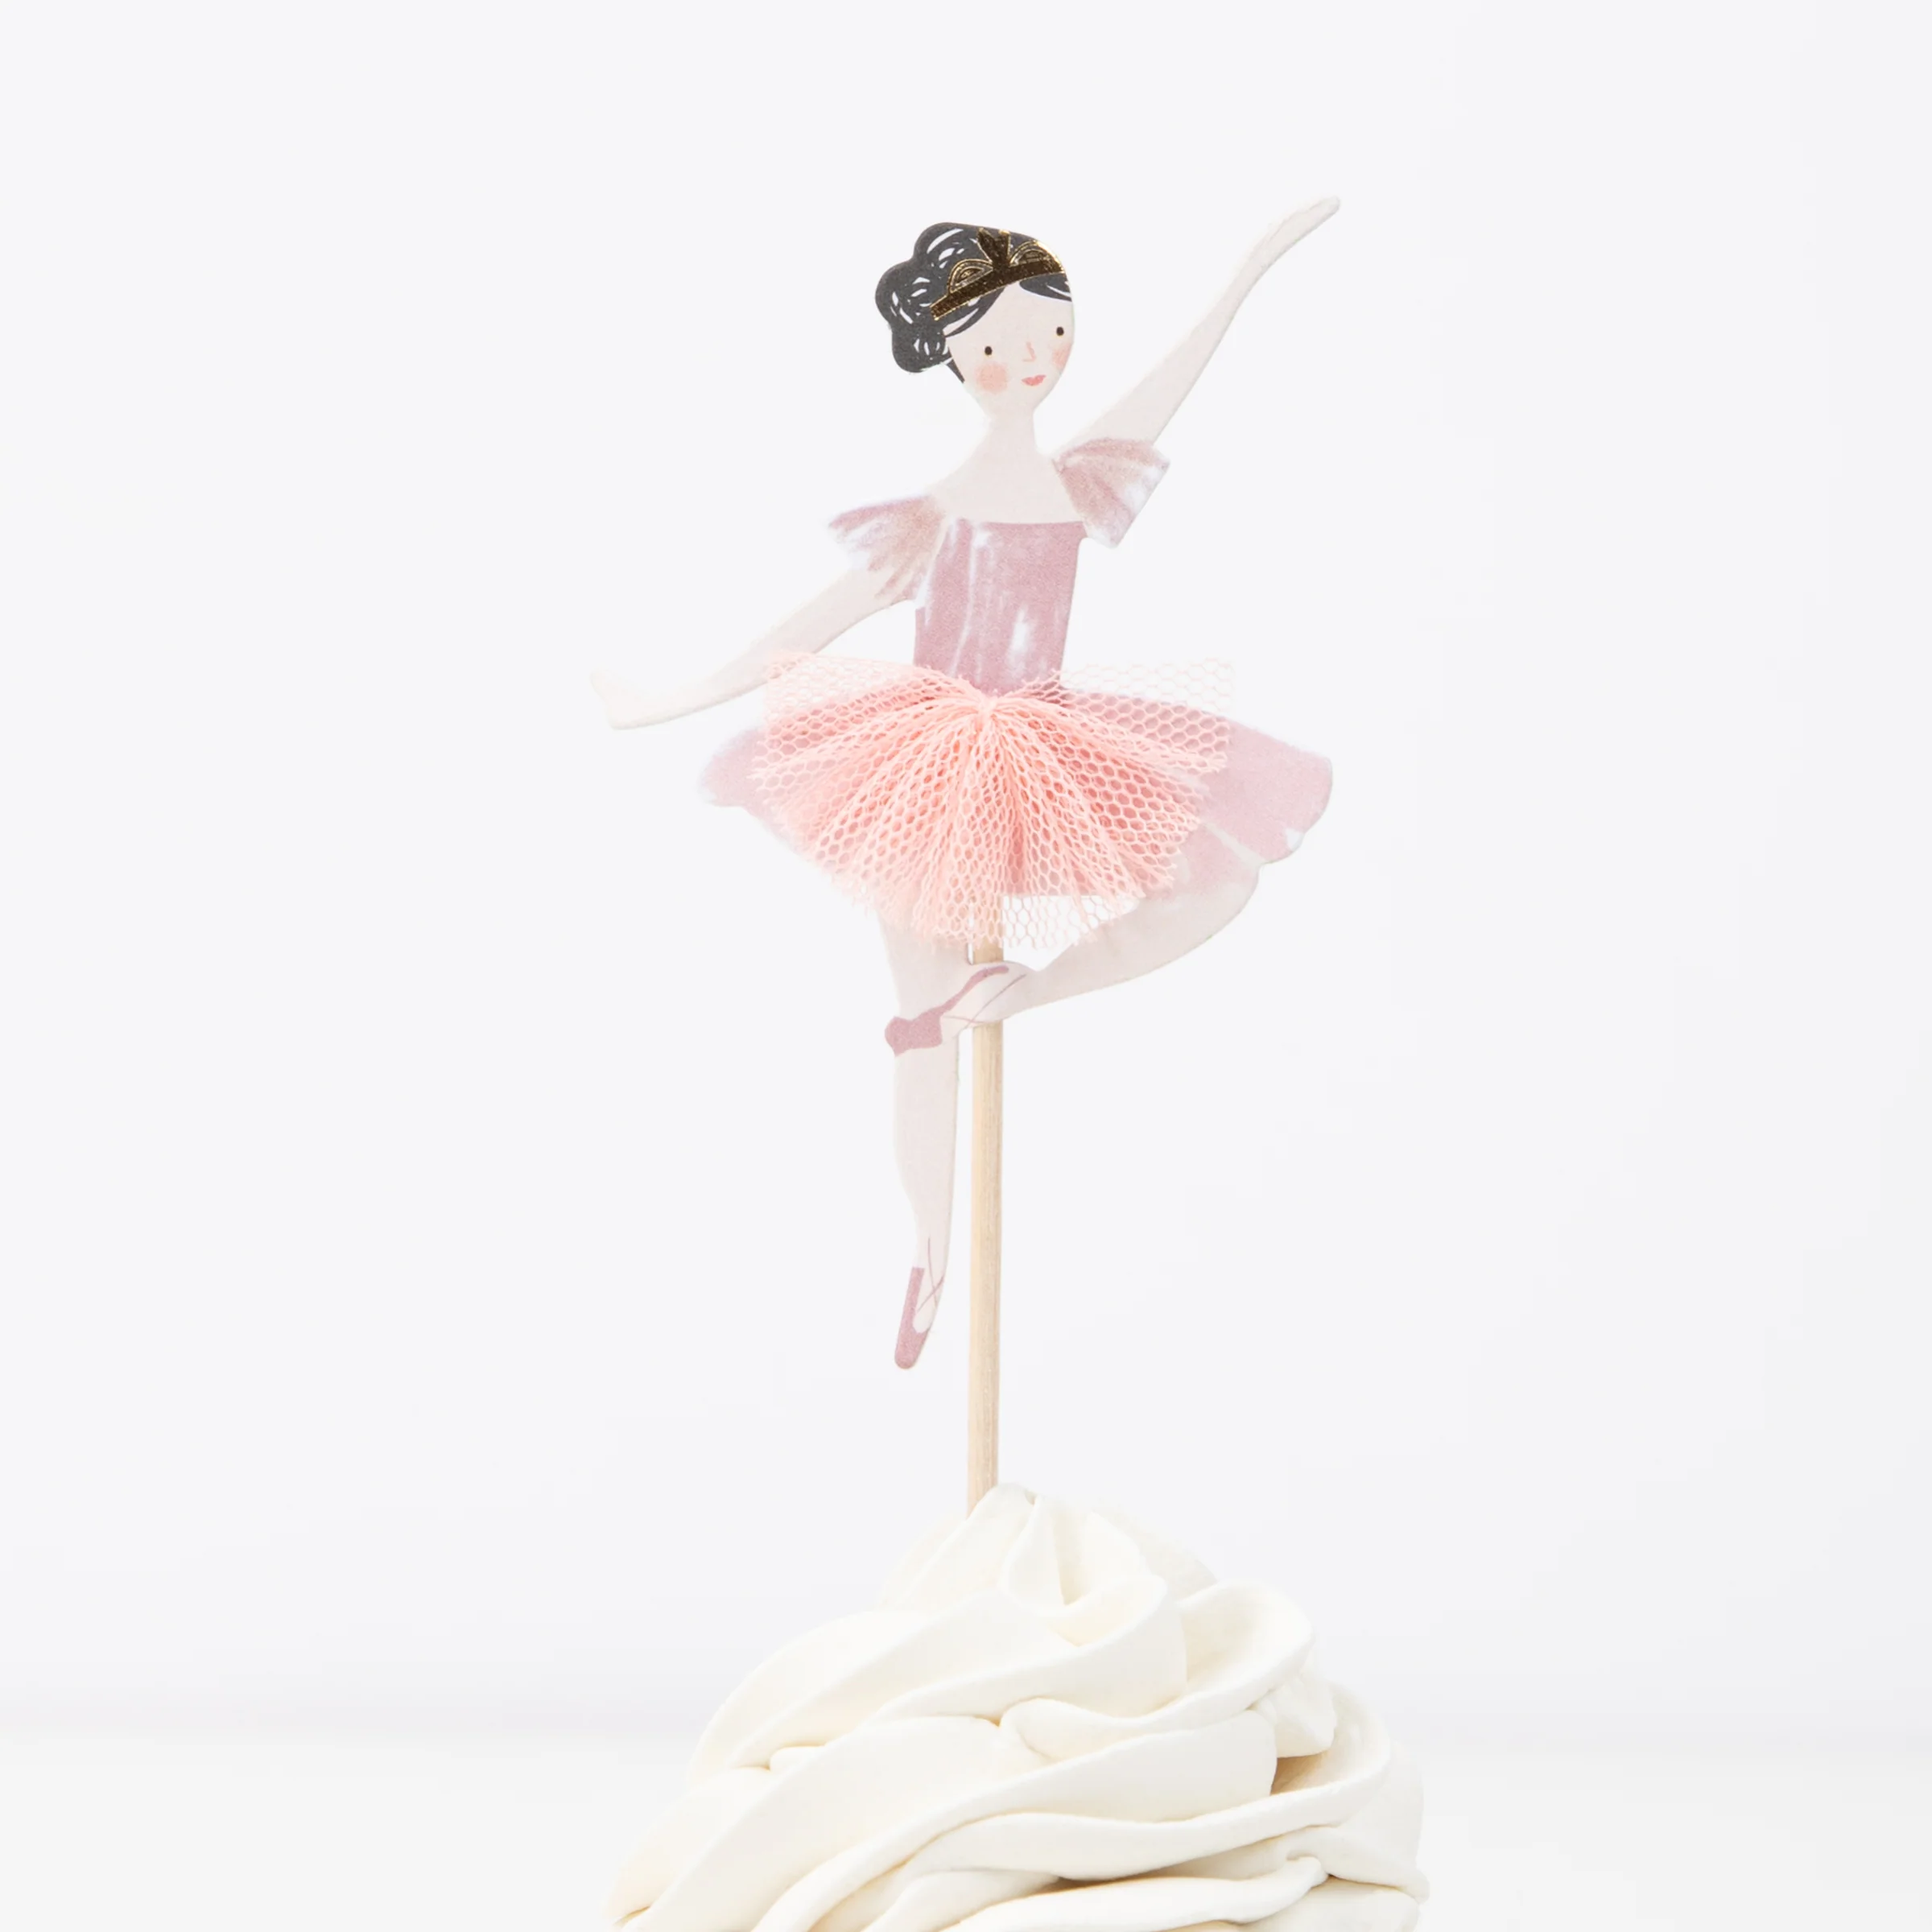 a cupcake with a ballerina figure on top